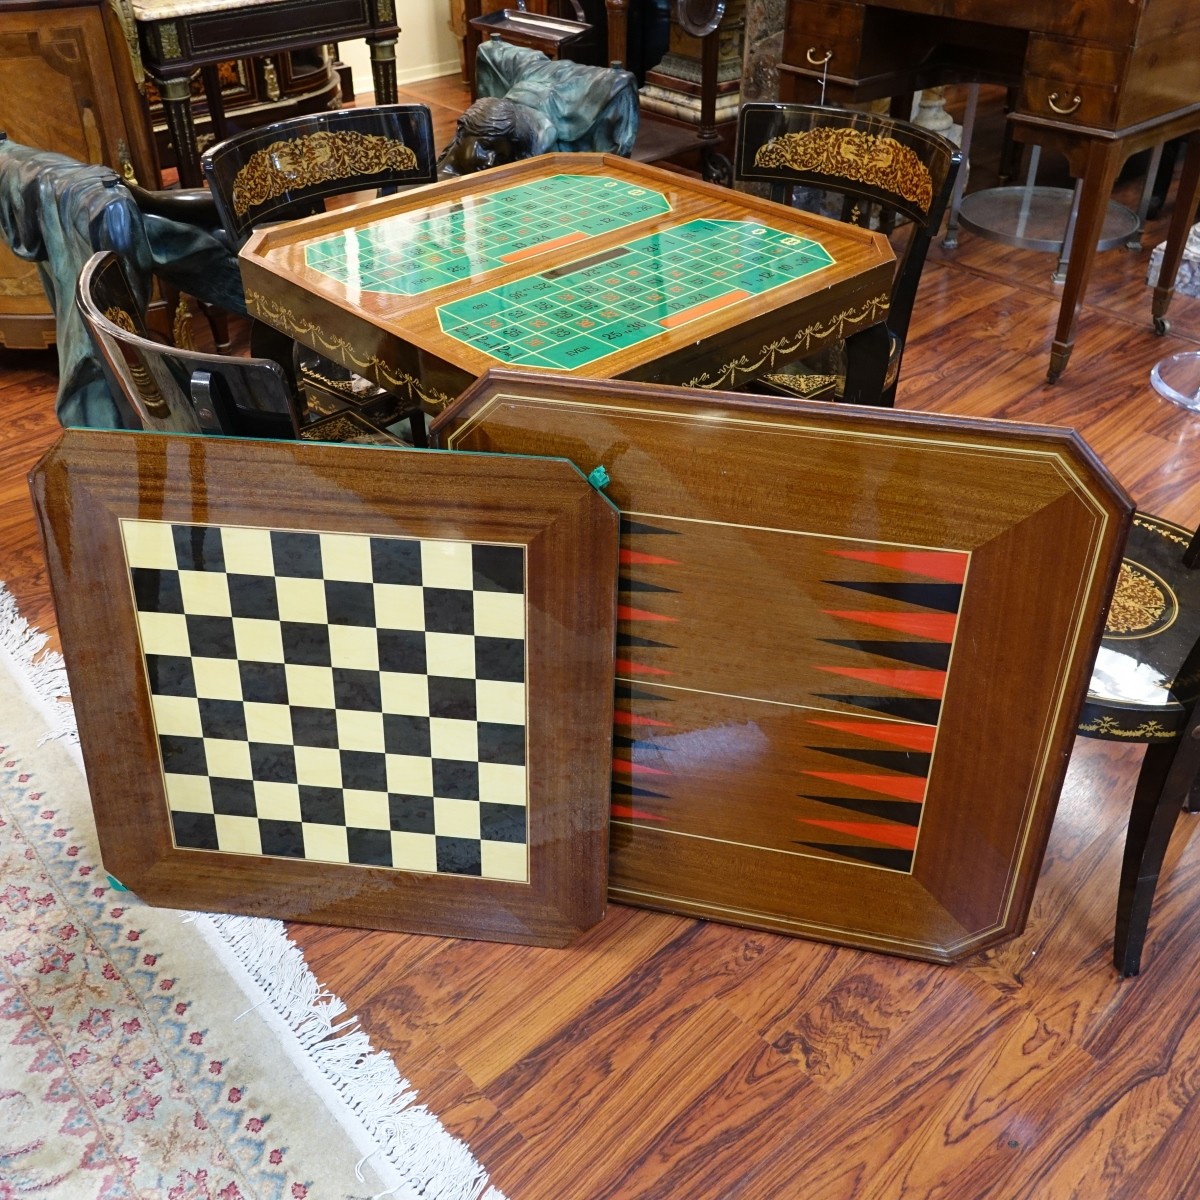 Vintage Italian Game Table and Chairs